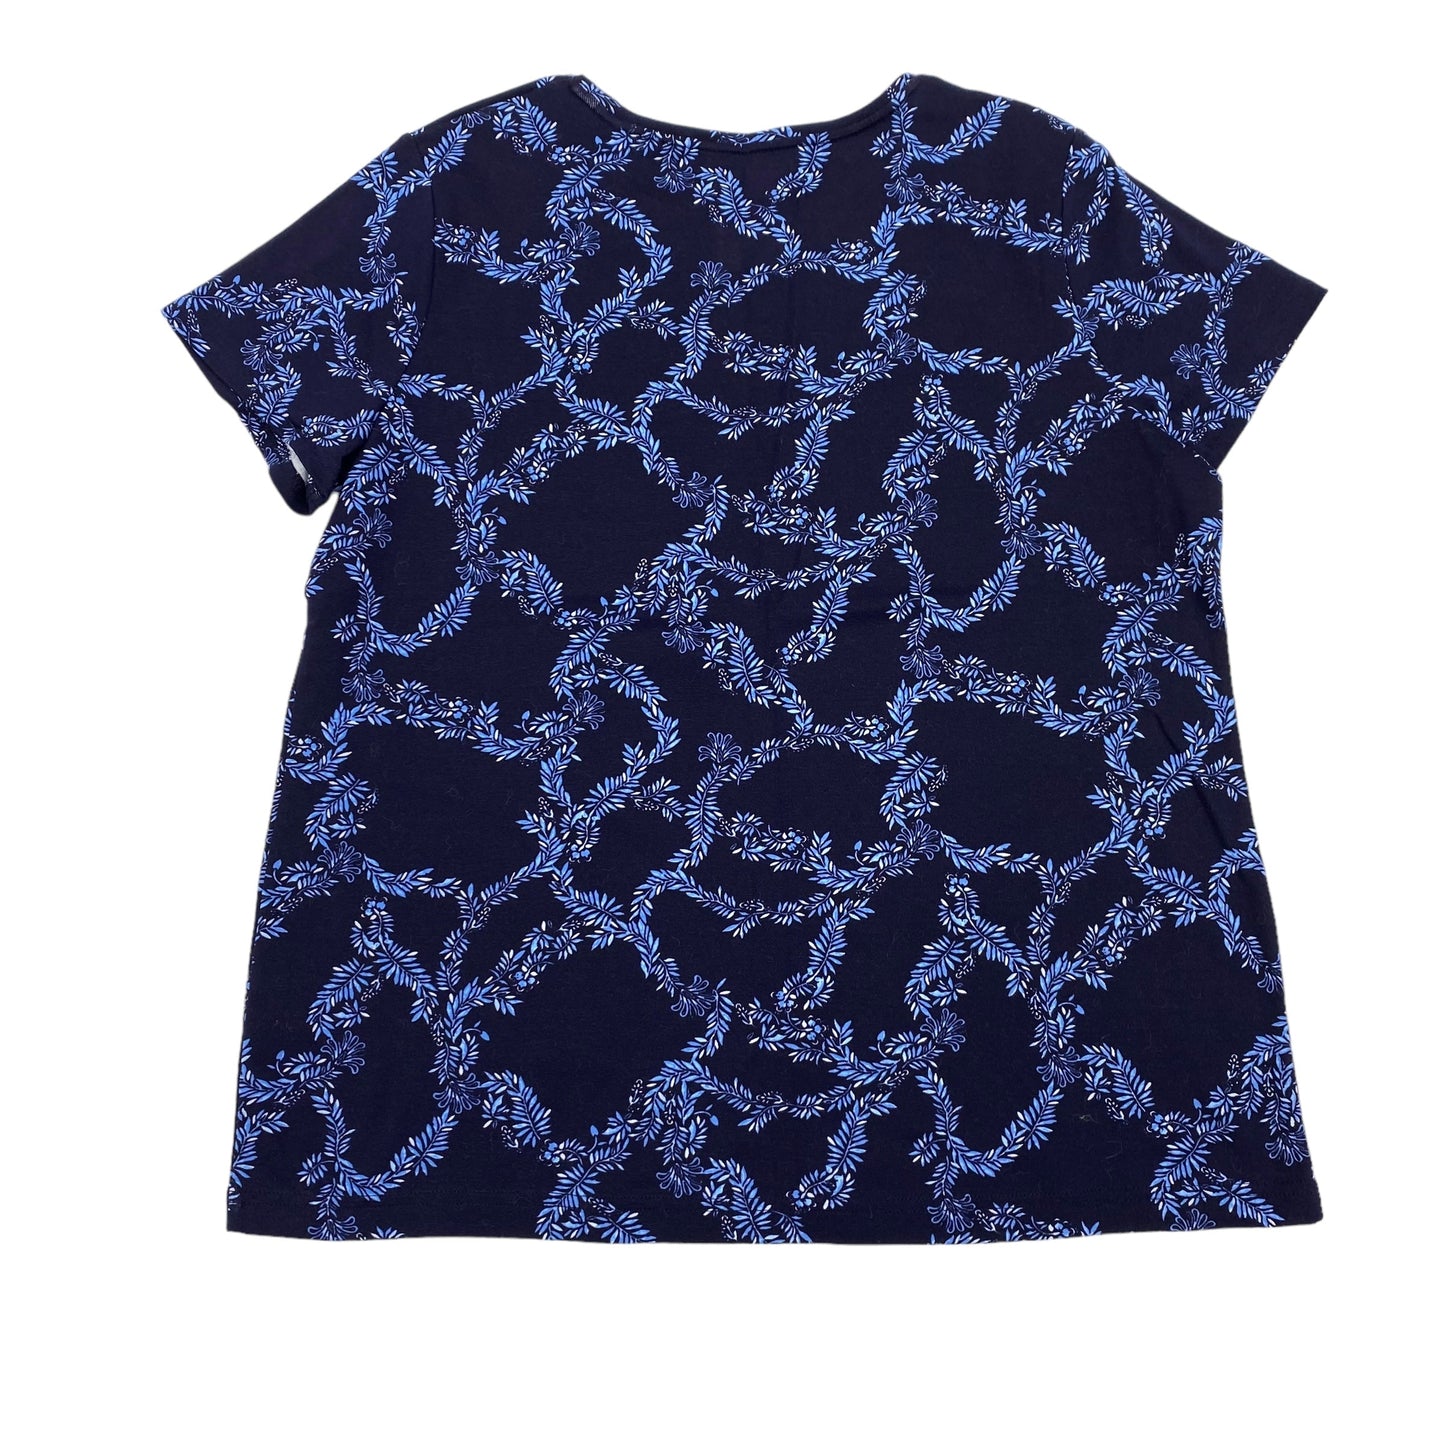 NAVY TOP SS by CROFT AND BARROW Size:XL